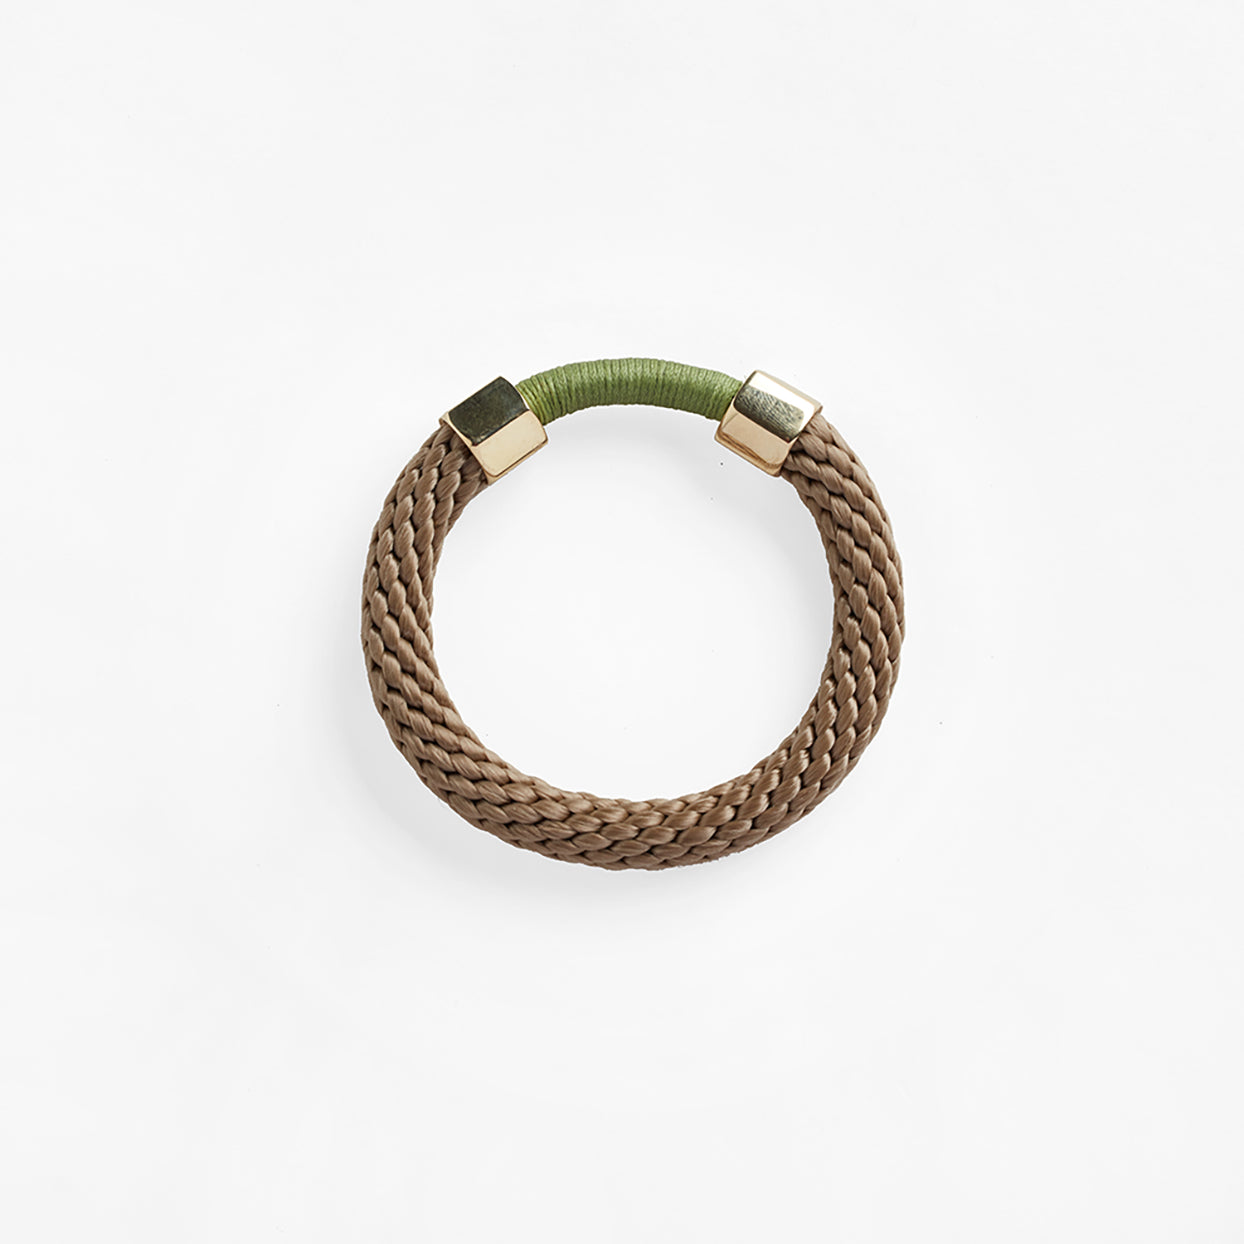 The Aruba Bracelet is a chunkier statement bracelet that features two metal embellishments. The rope texture and contrasting colours in the bracelet offers a unique look.